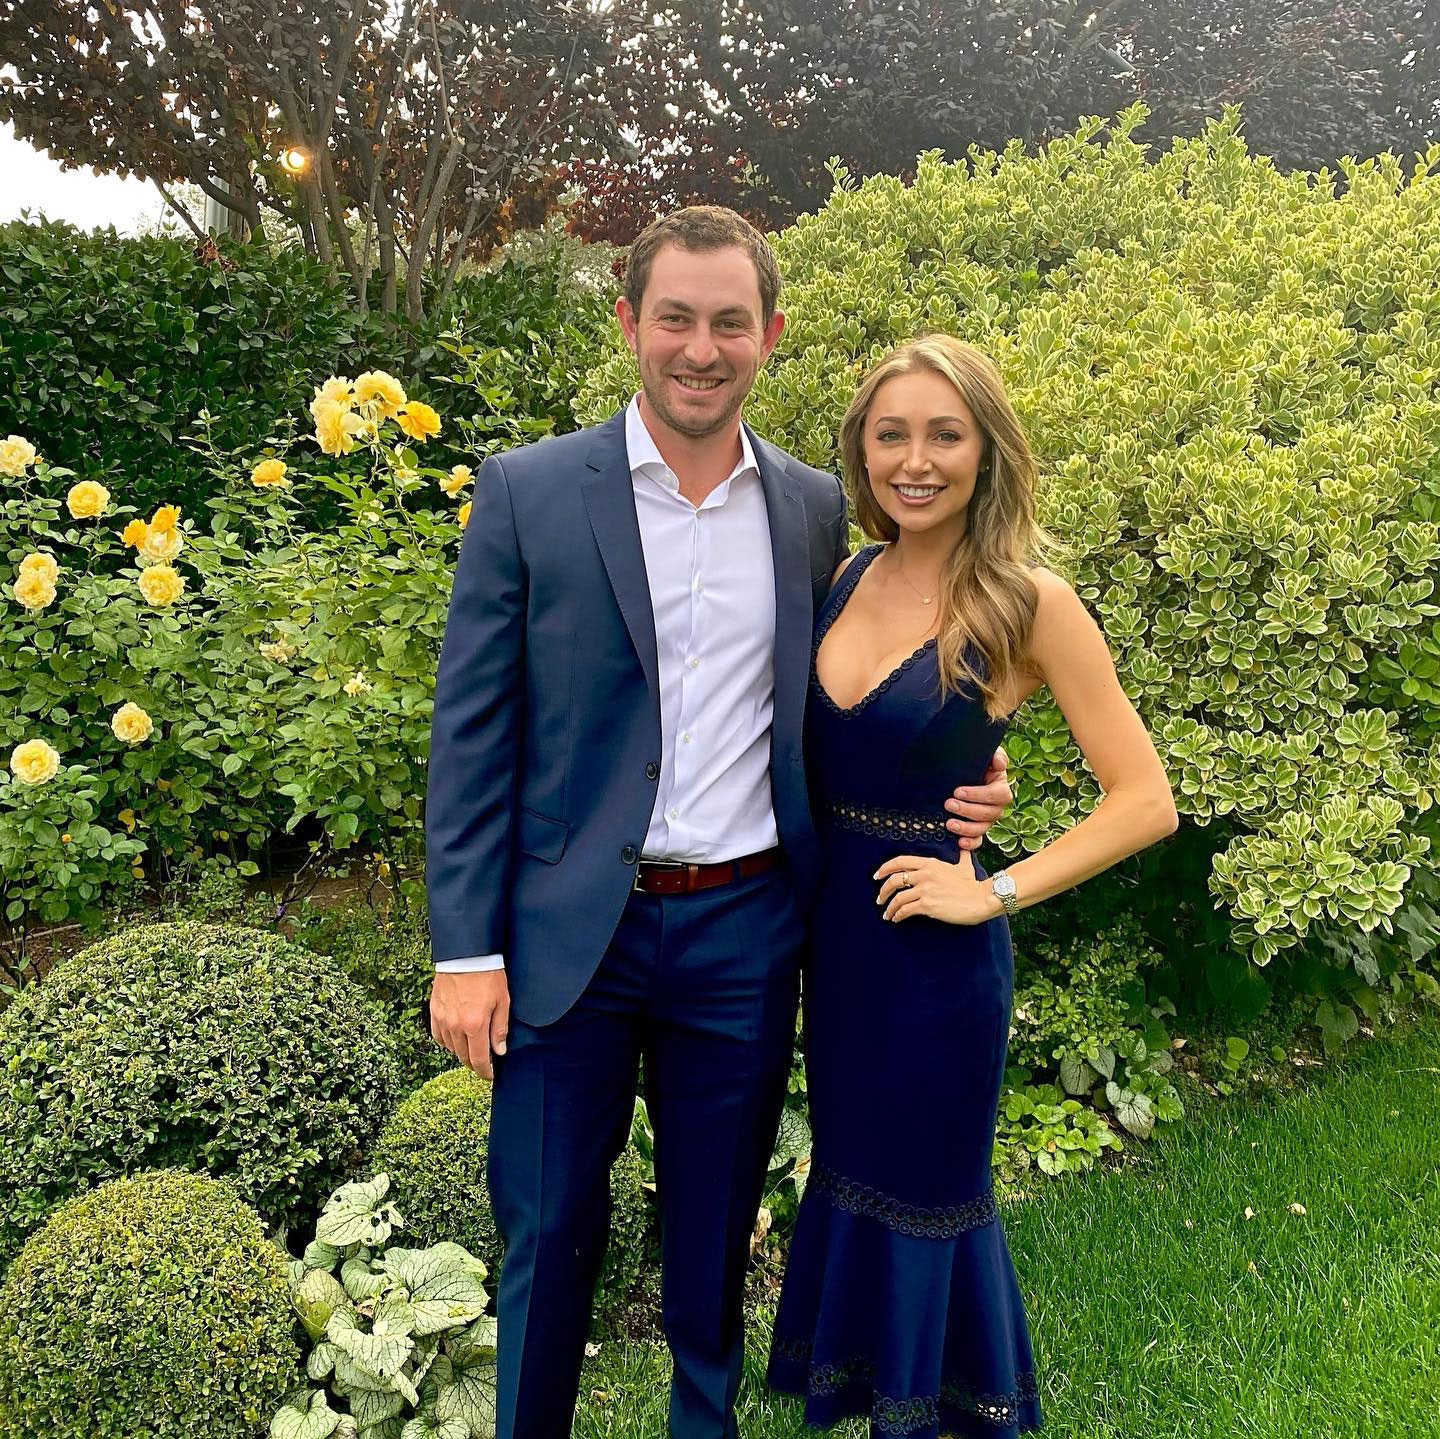 Who Is Patrick Cantlay's Wife? Know About Their Relationship